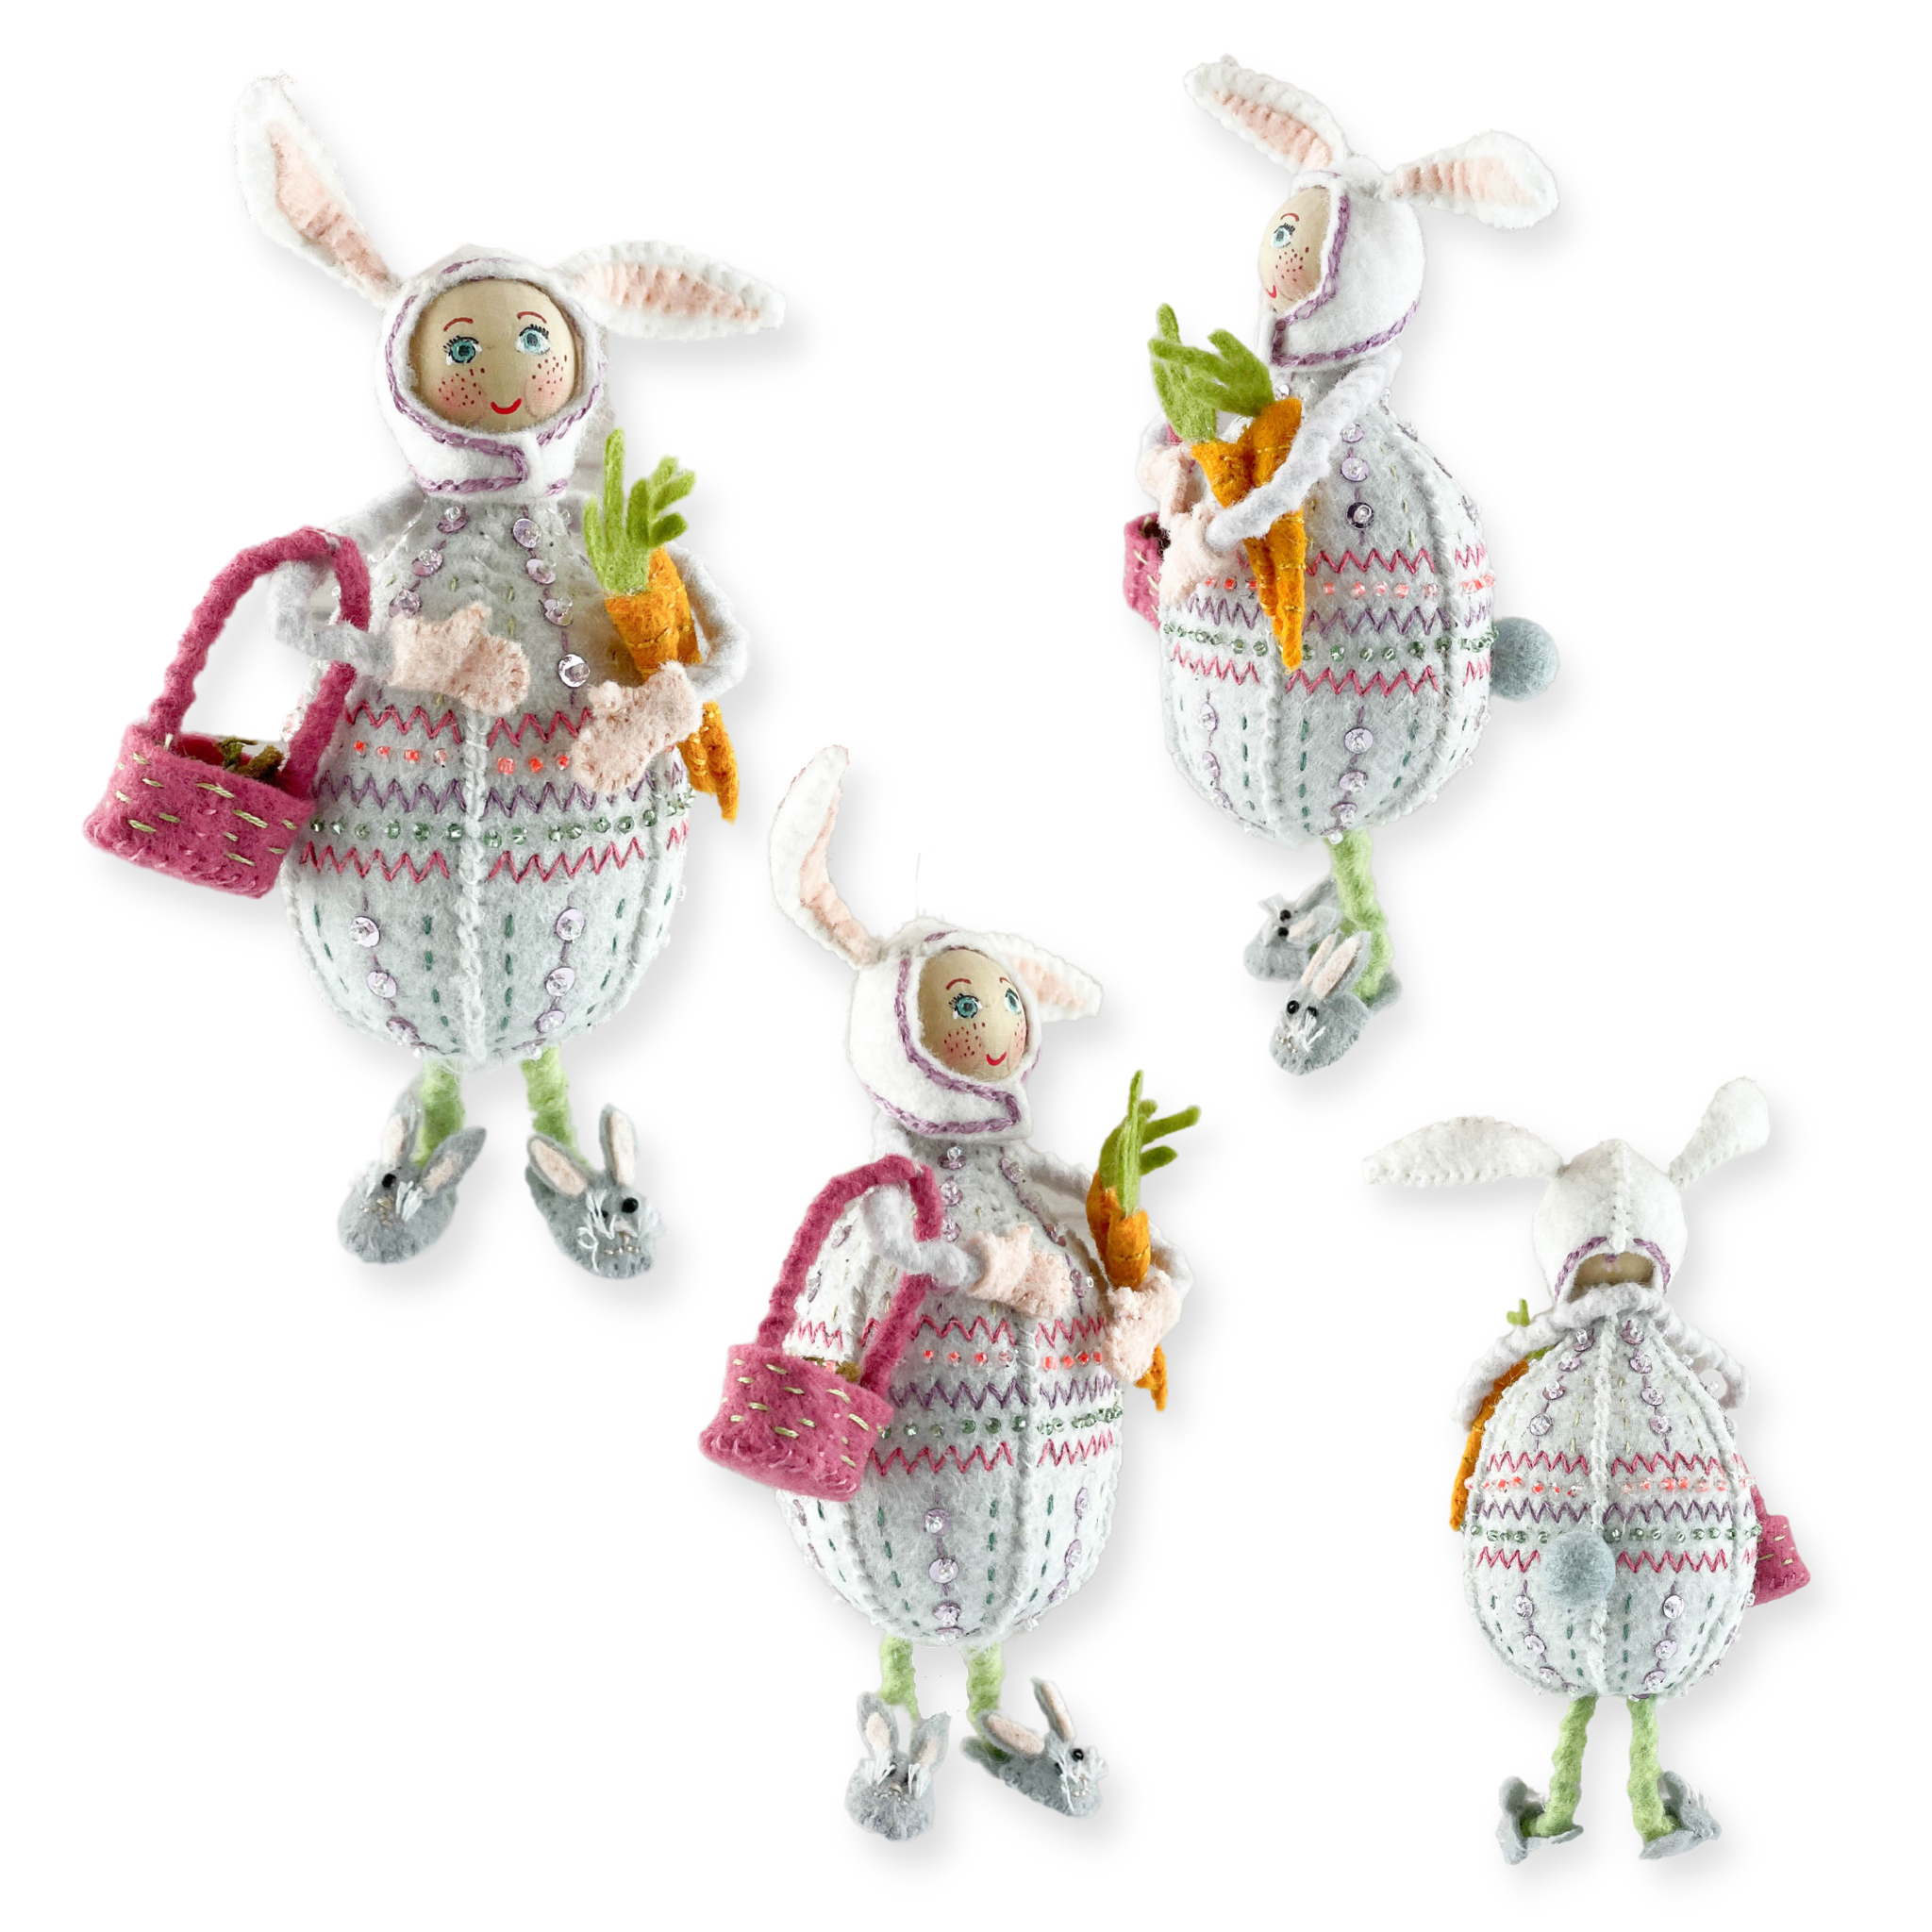 Whimsical Easter Bunny E-Pattern and Instructions